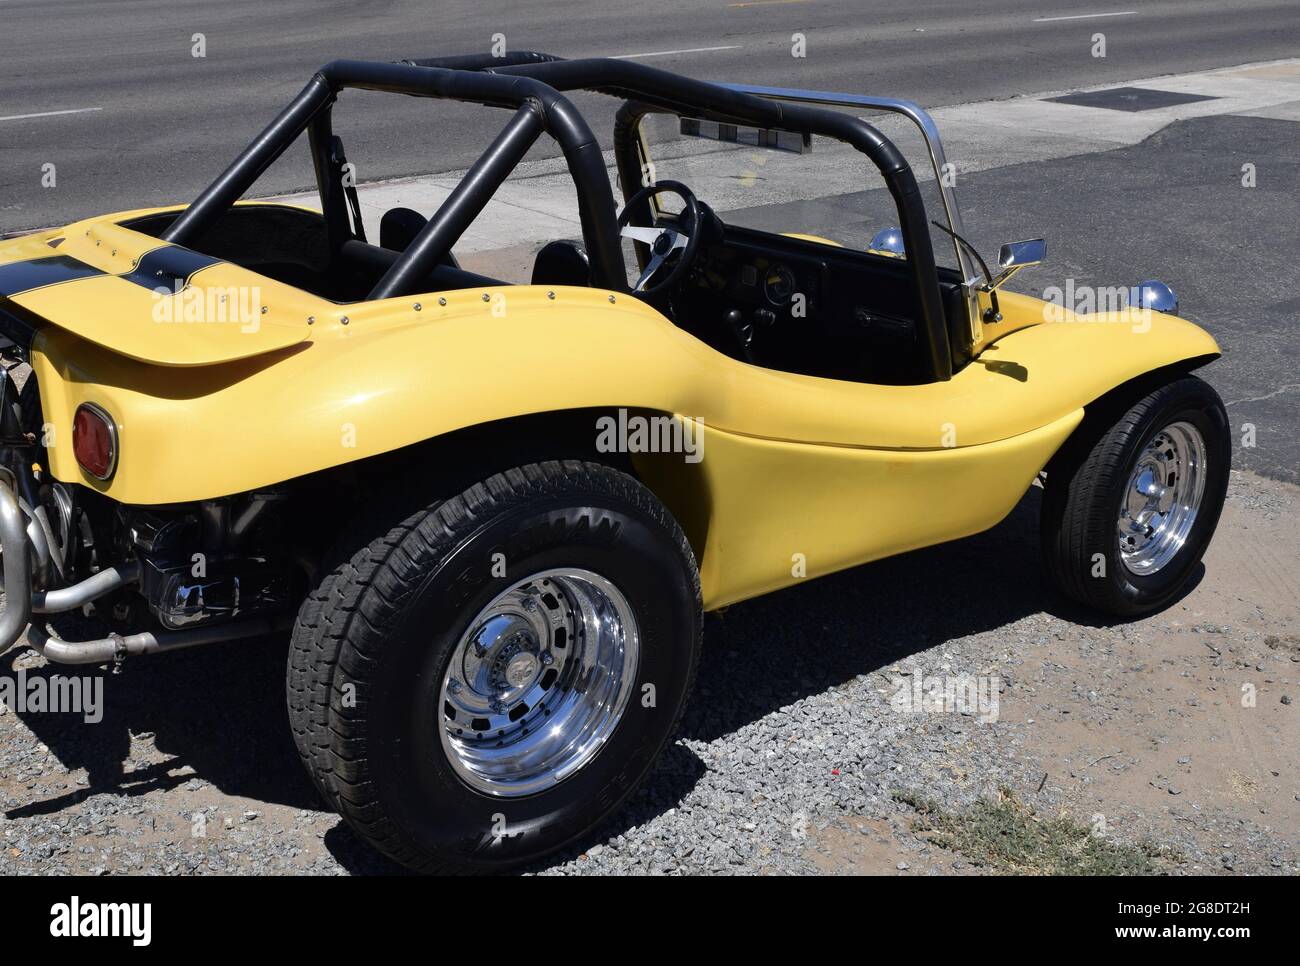 Knuppel taal Verzoenen FRESNO, UNITED STATES - Jul 07, 2021: A yellow-colored dune buggy parked  outside with black large tires in Fresno, California, USA Stock Photo -  Alamy